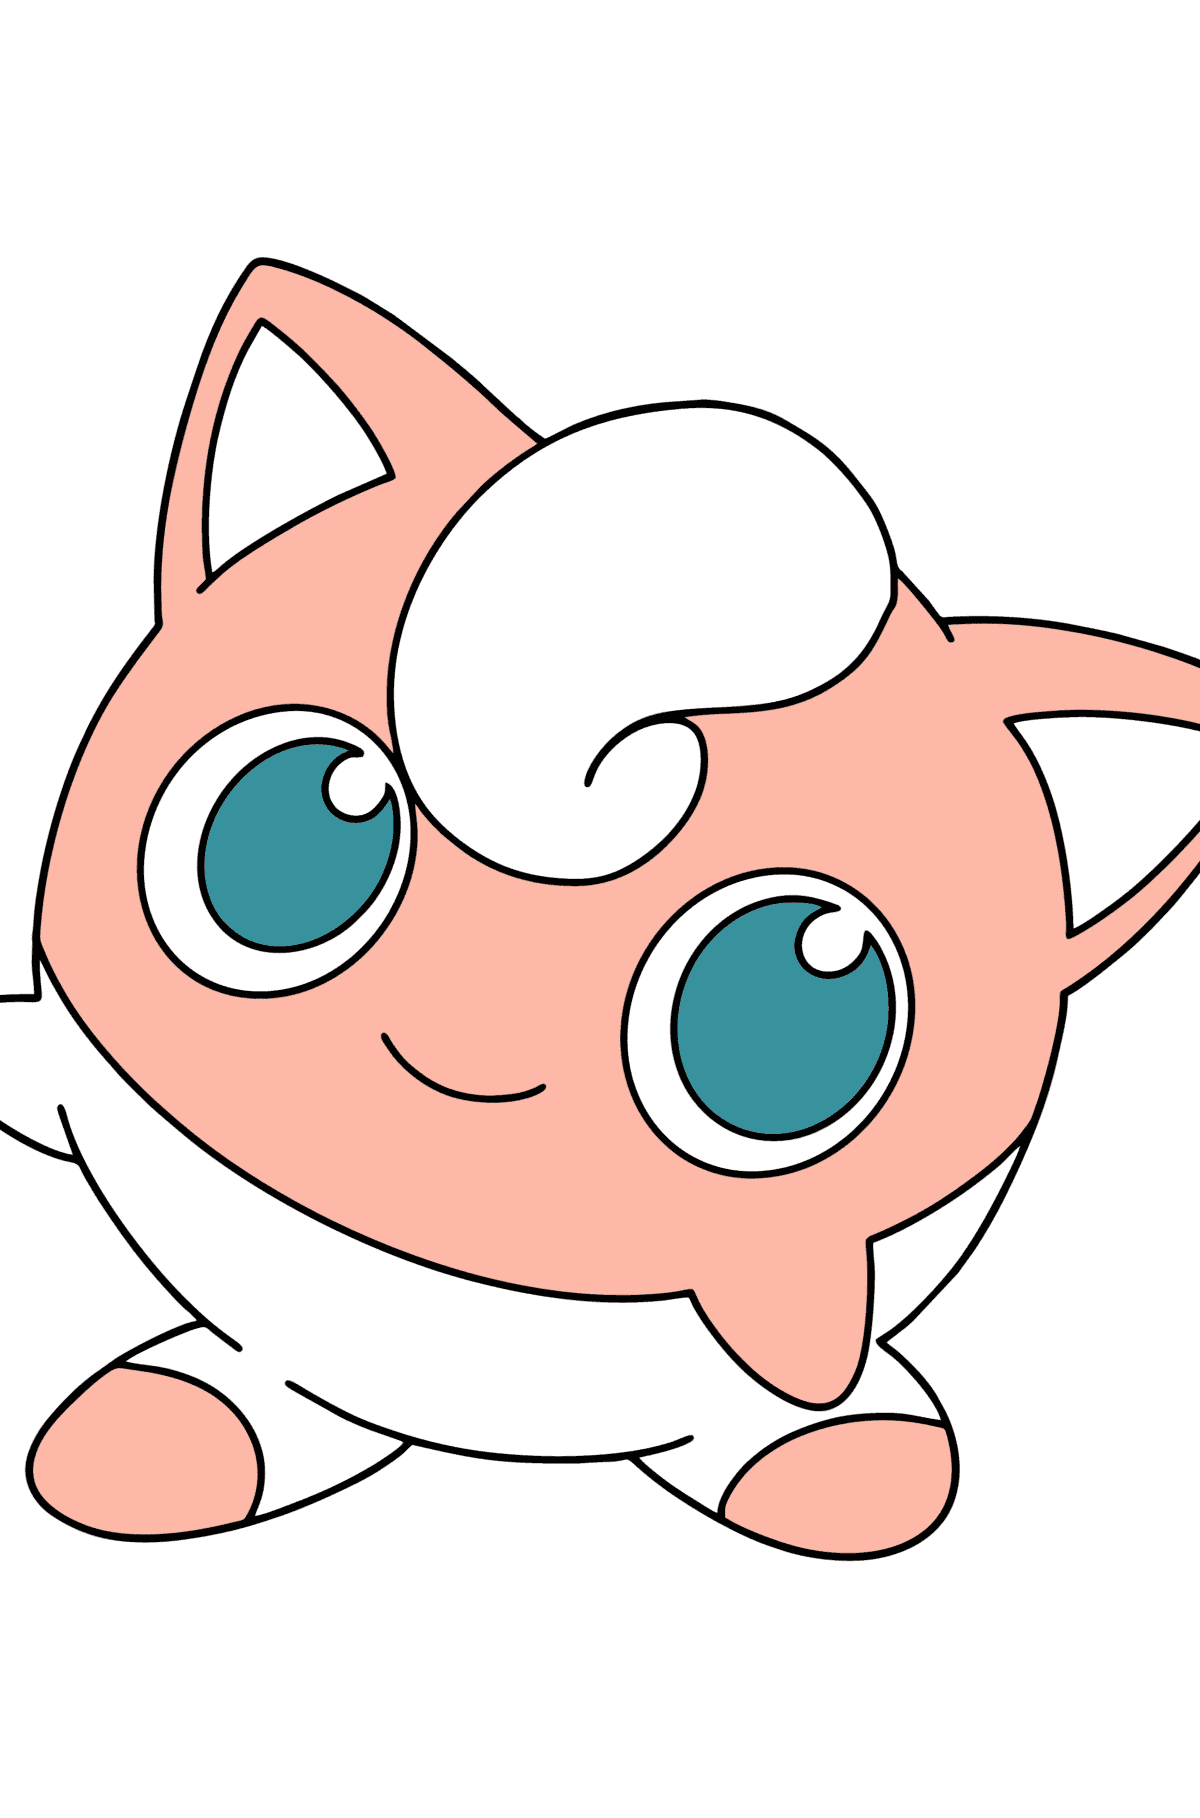 Coloring page Pokémon Go Jigglypuff - Coloring Pages for Kids